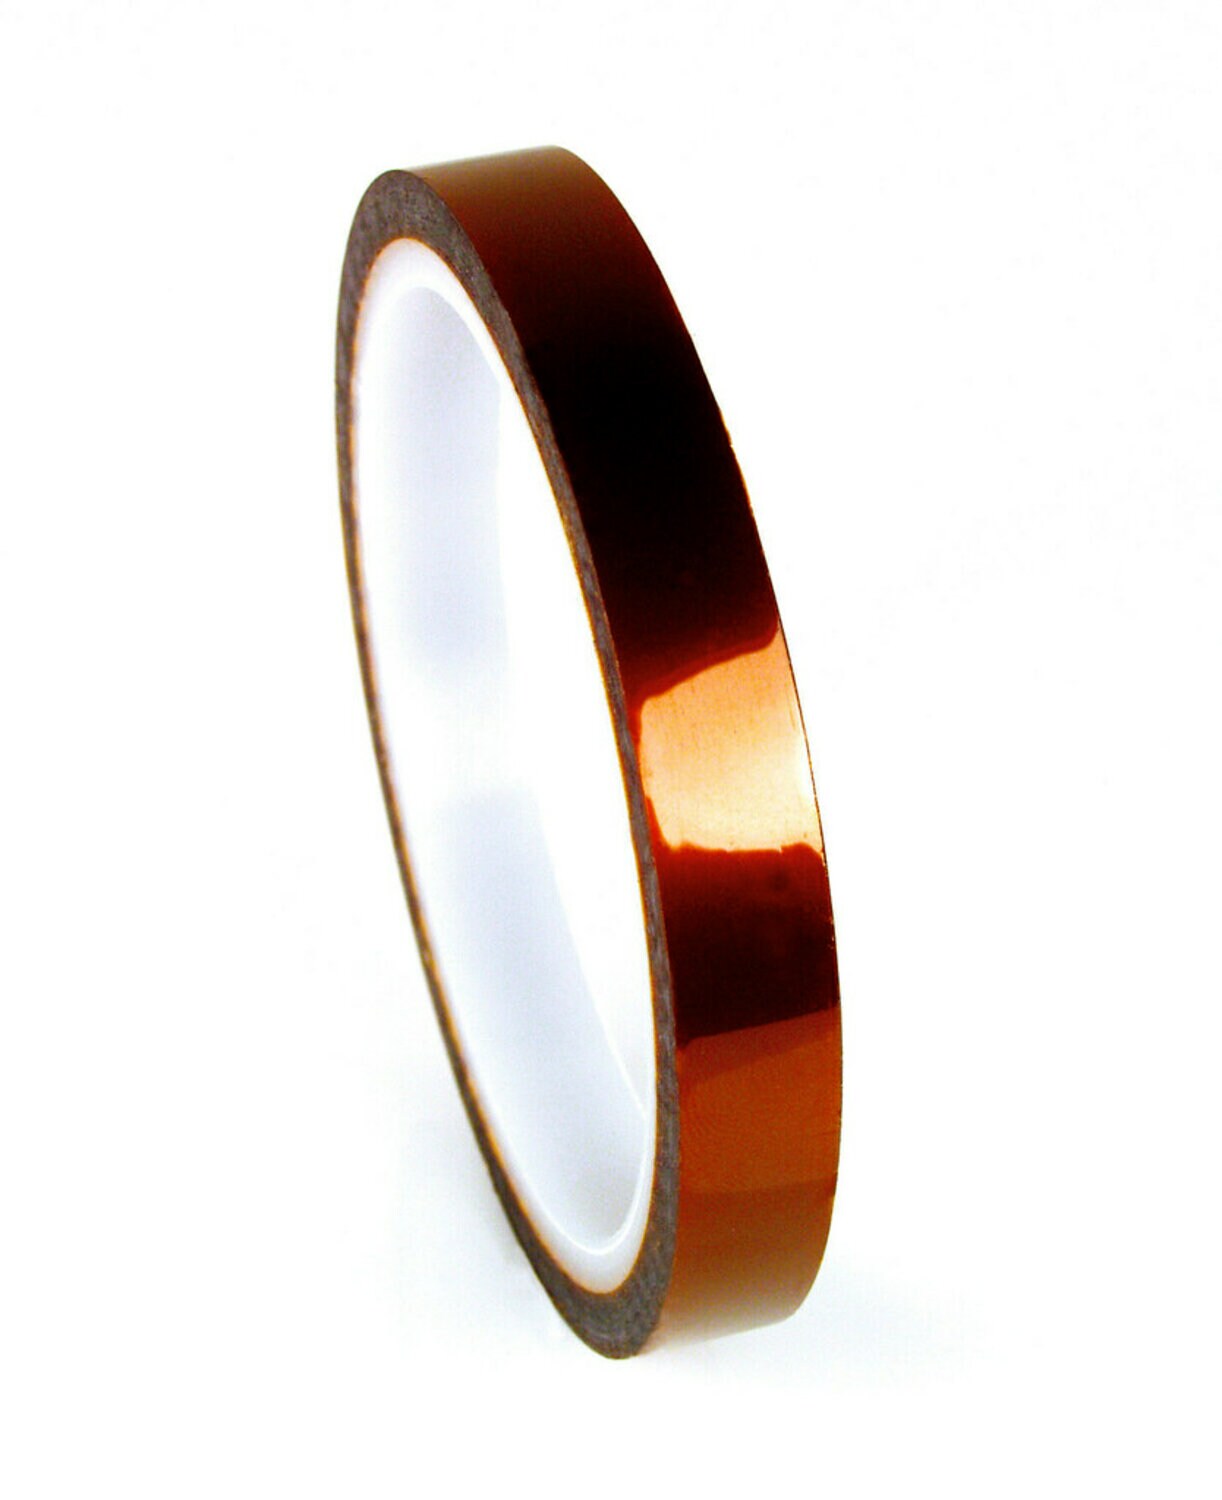 7010320386 - 3M Polyimide Film Electrical Tape 1205, Amber, Acrylic Adhesive, 1 mil
film, 7/8 in x 36 yd (22,23 mm x 33 m), 11/Case